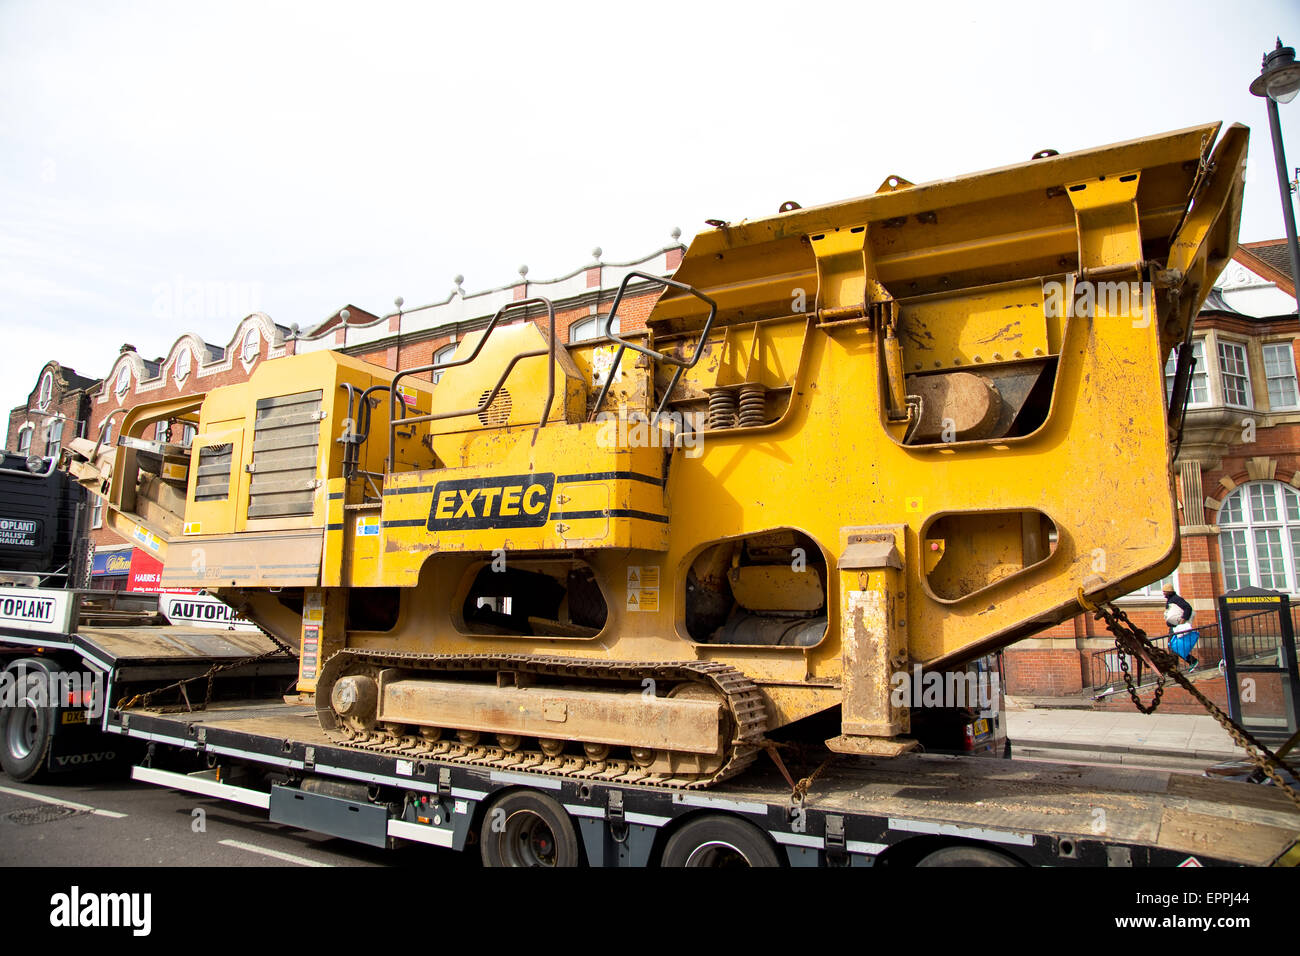 LONDON - MARCH 30TH: A transporter  carries a rock crushing machine on March the 30th, 2015, in London, England, UK. Rock crushe Stock Photo